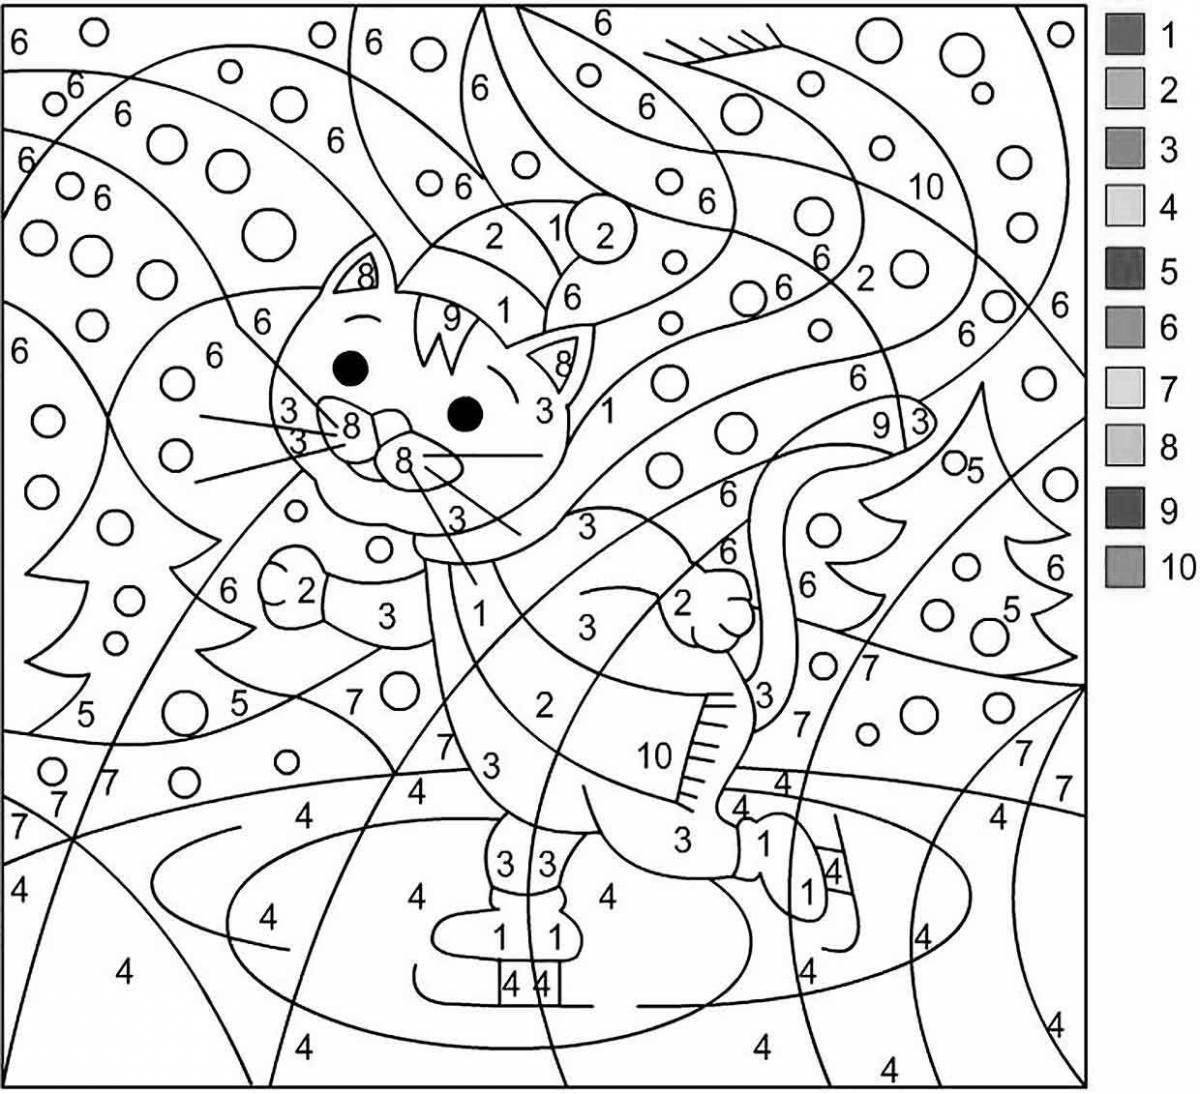 Color-joyful set by numbers coloring page